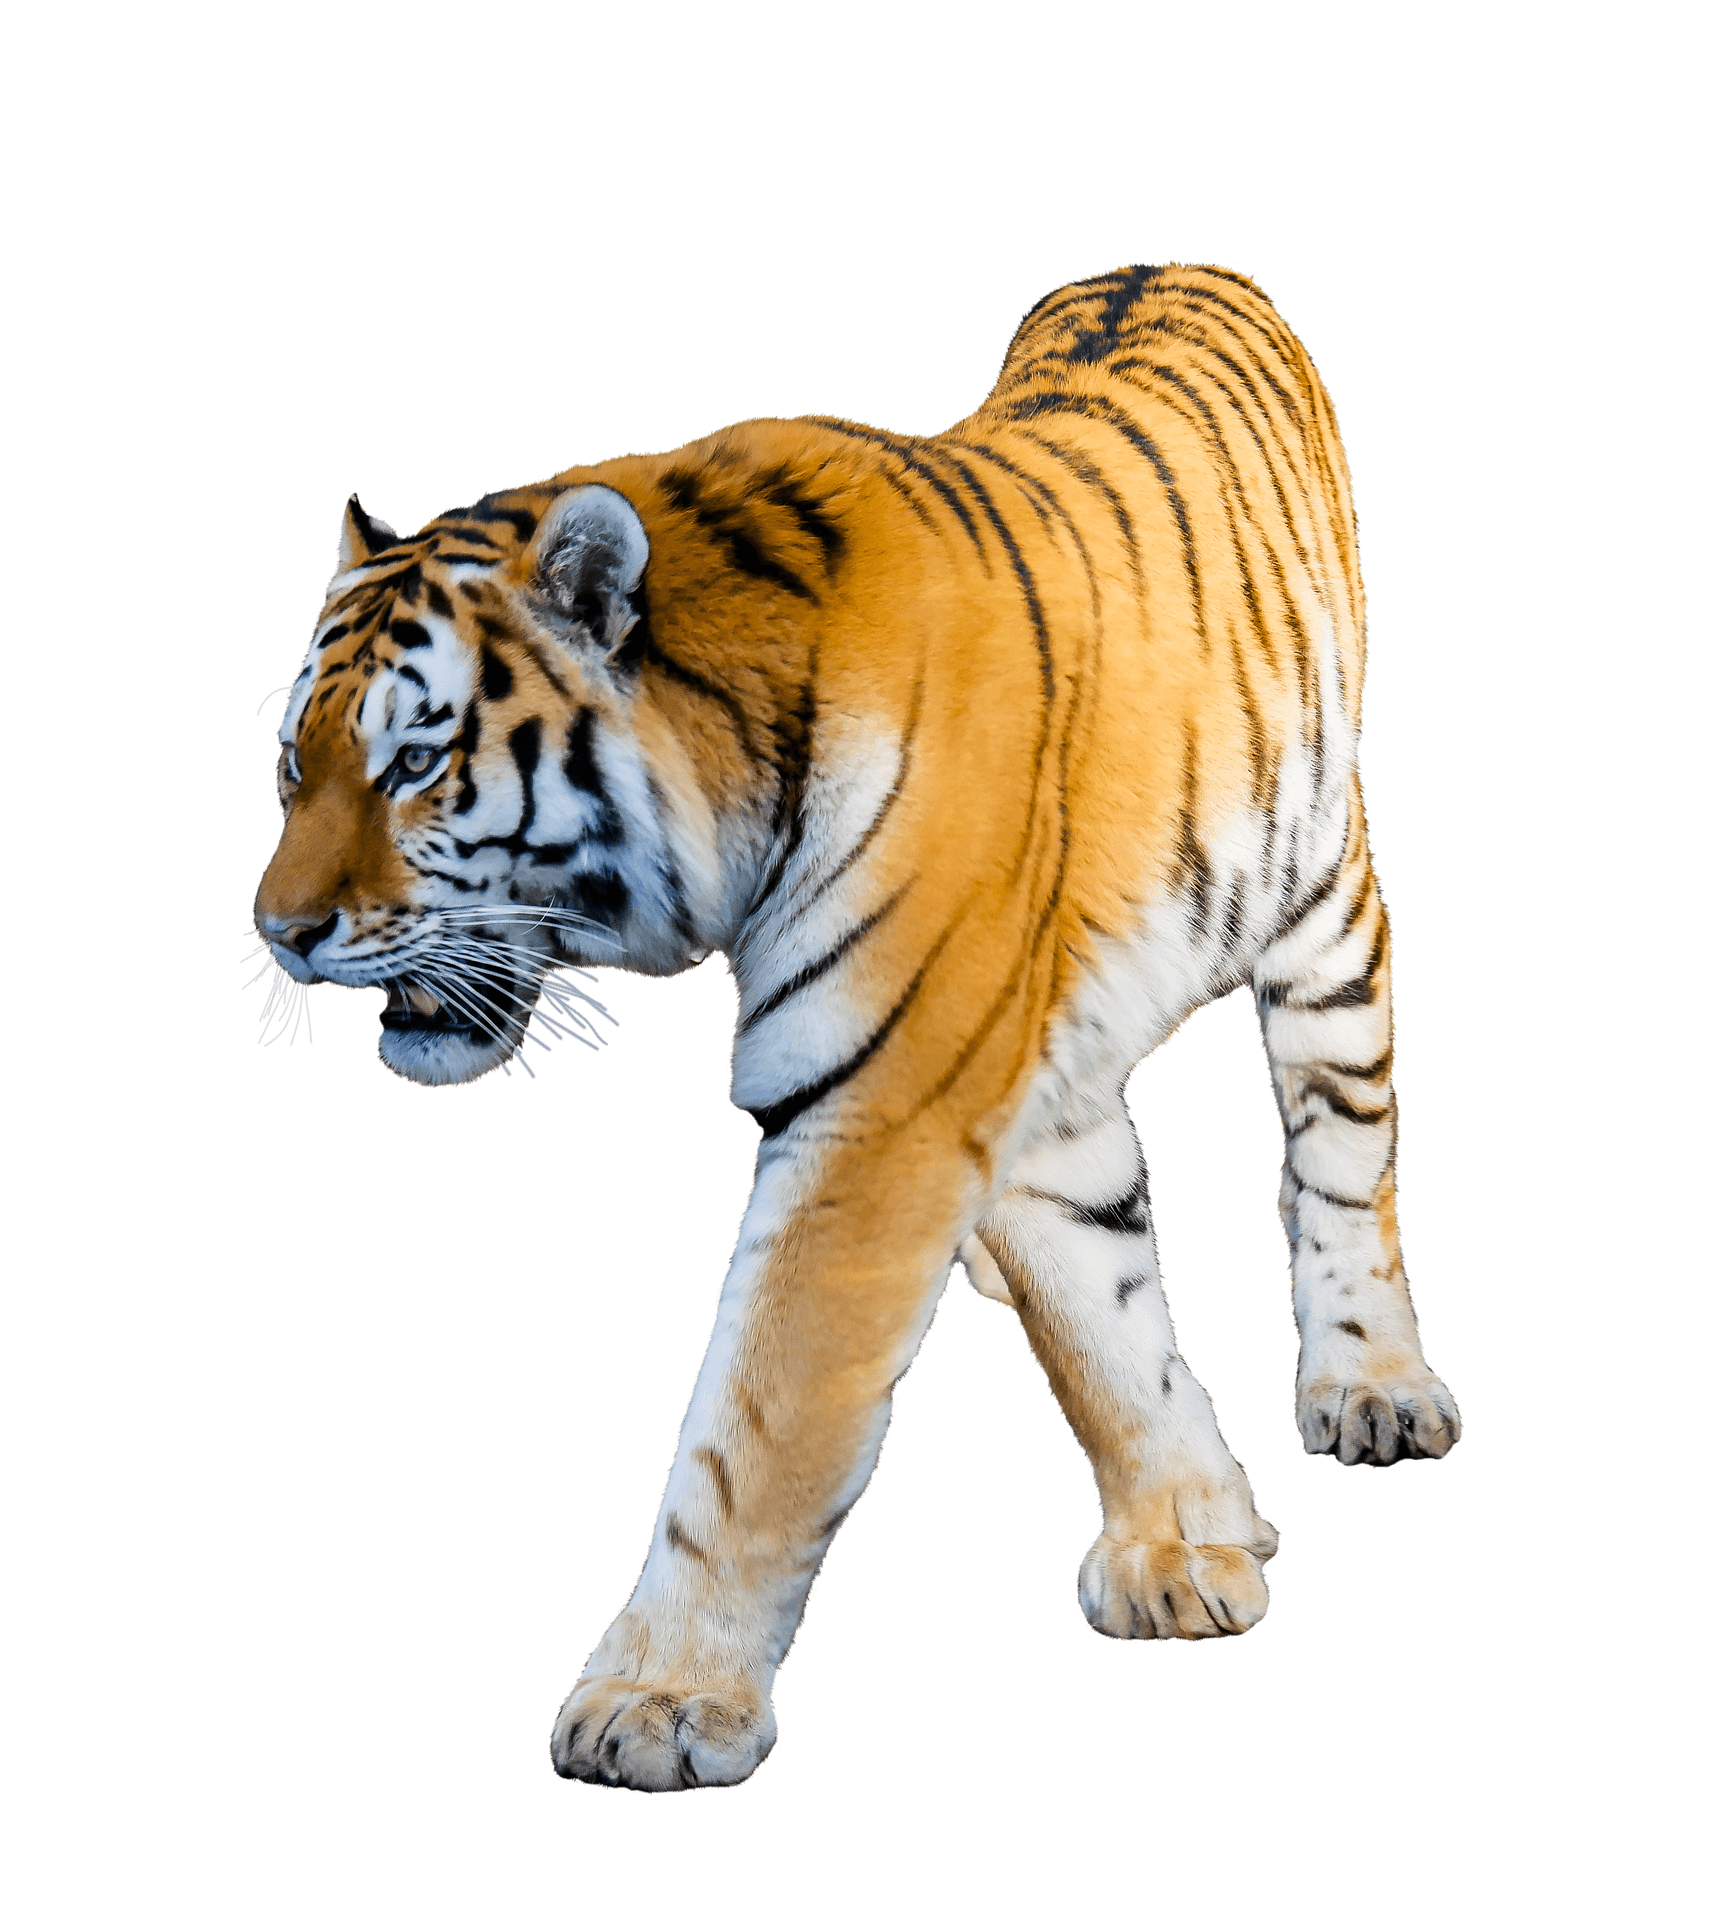 Tiger White Background Image. All White Background